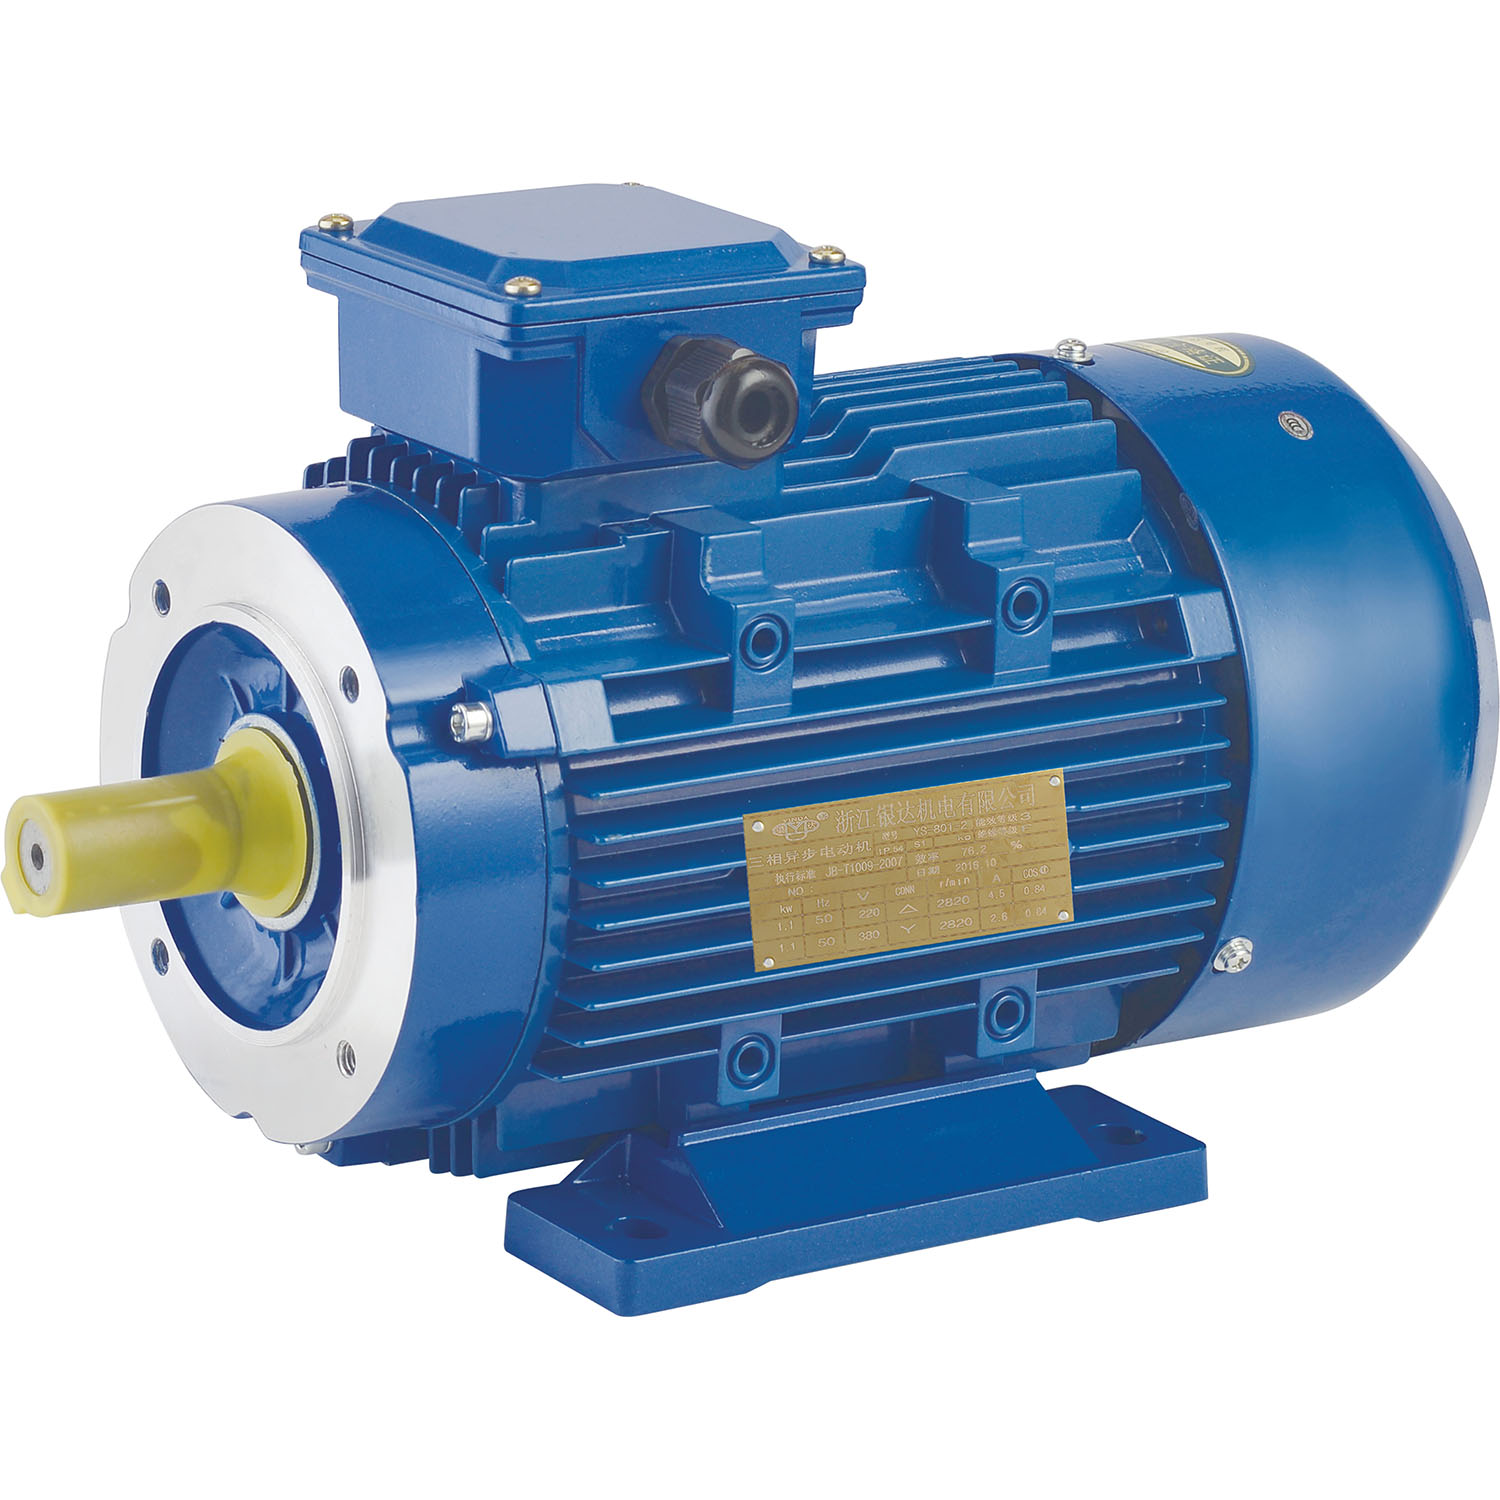 YX3-160M2-8 5.5KW 7.5HP aluminum cylinder series high efficiency three-phase asynchronous motor